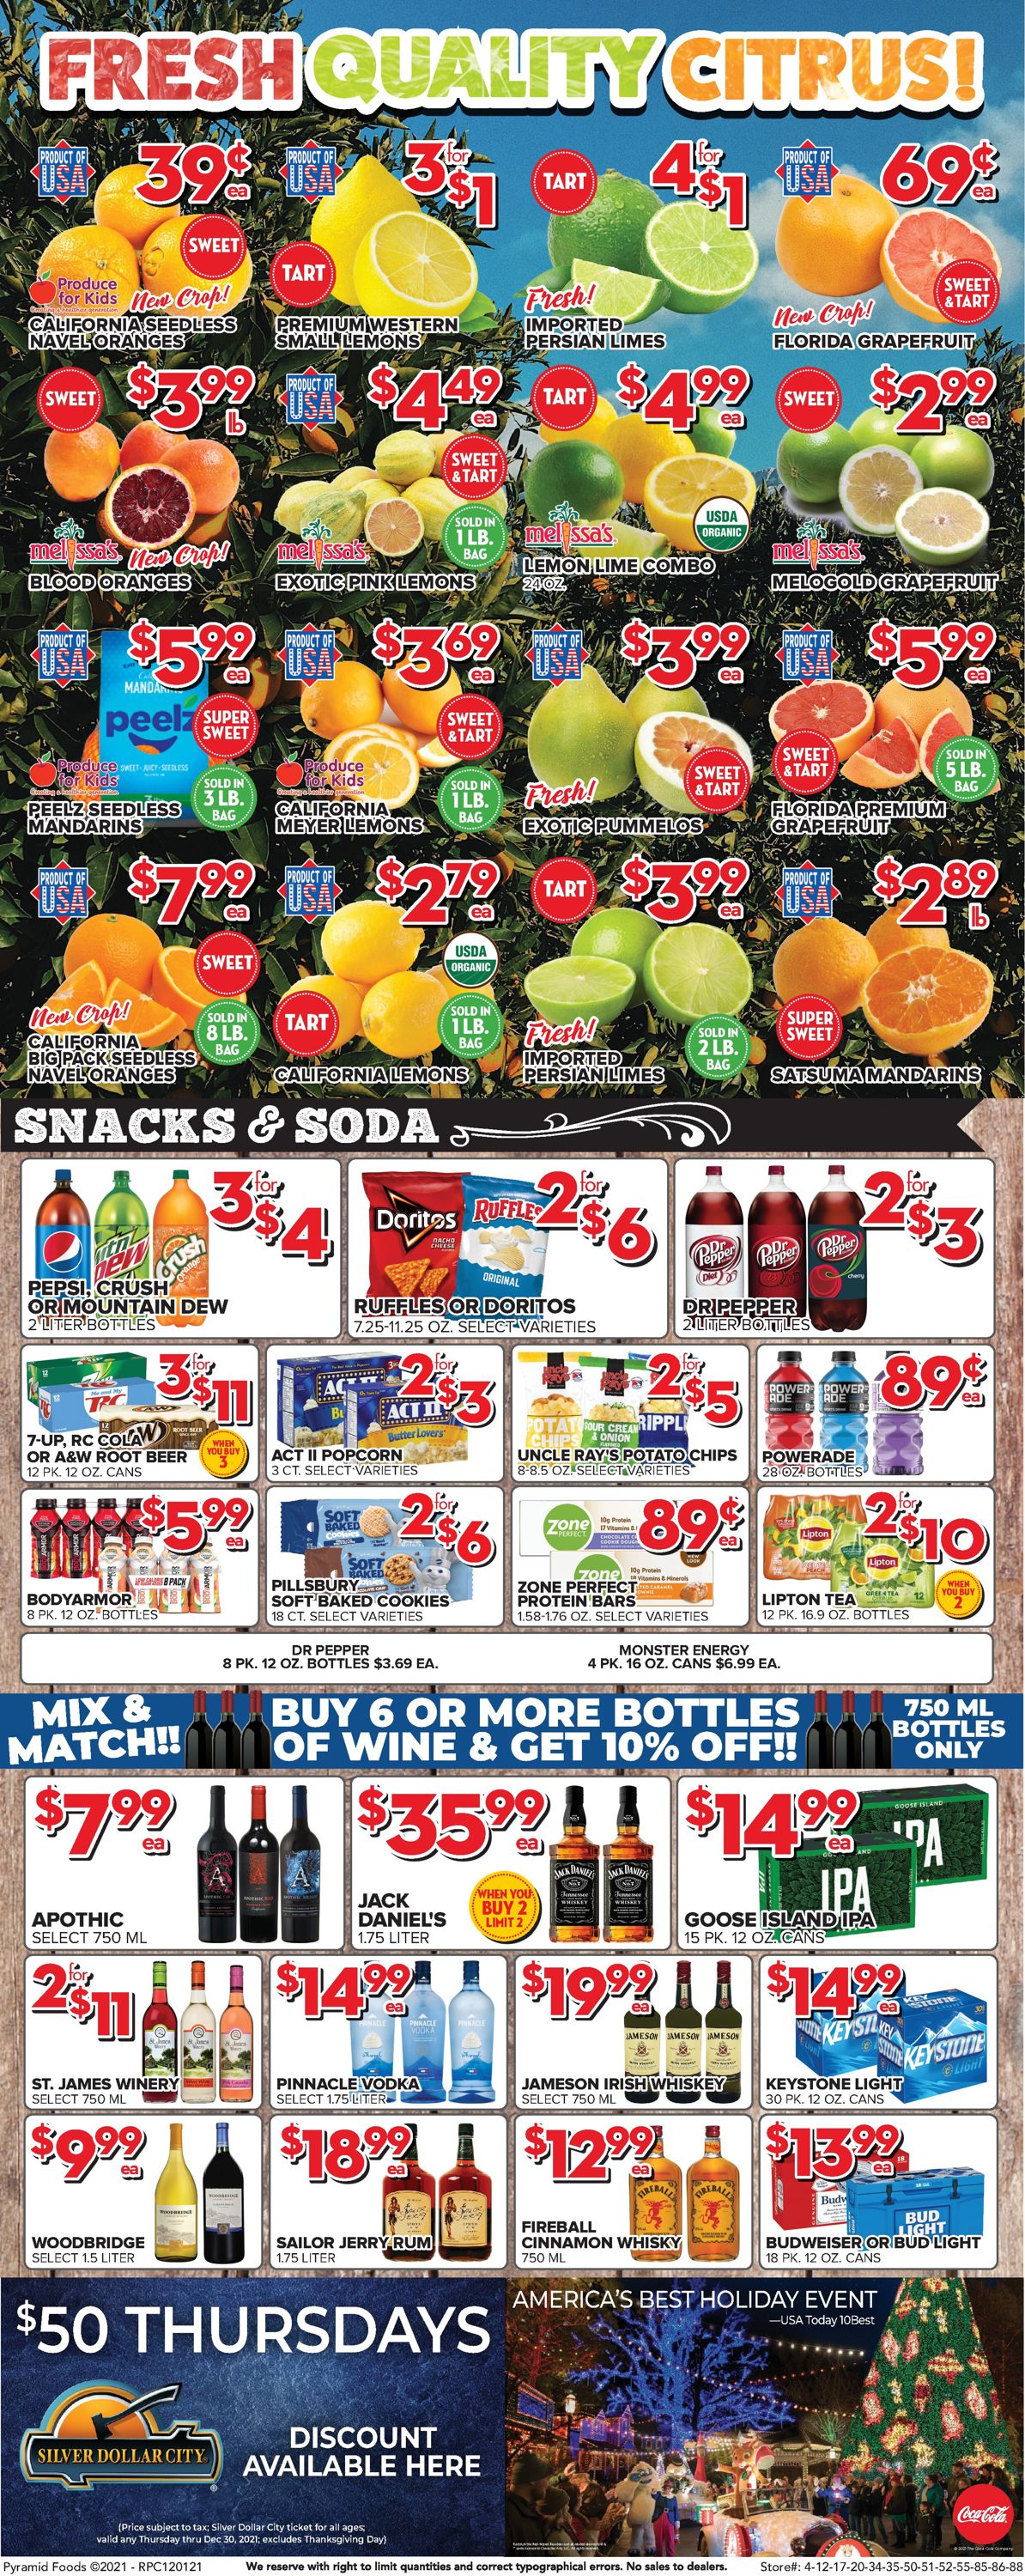 Price Cutter Weekly Ad Circular - valid 12/01-12/07/2021 (Page 4)